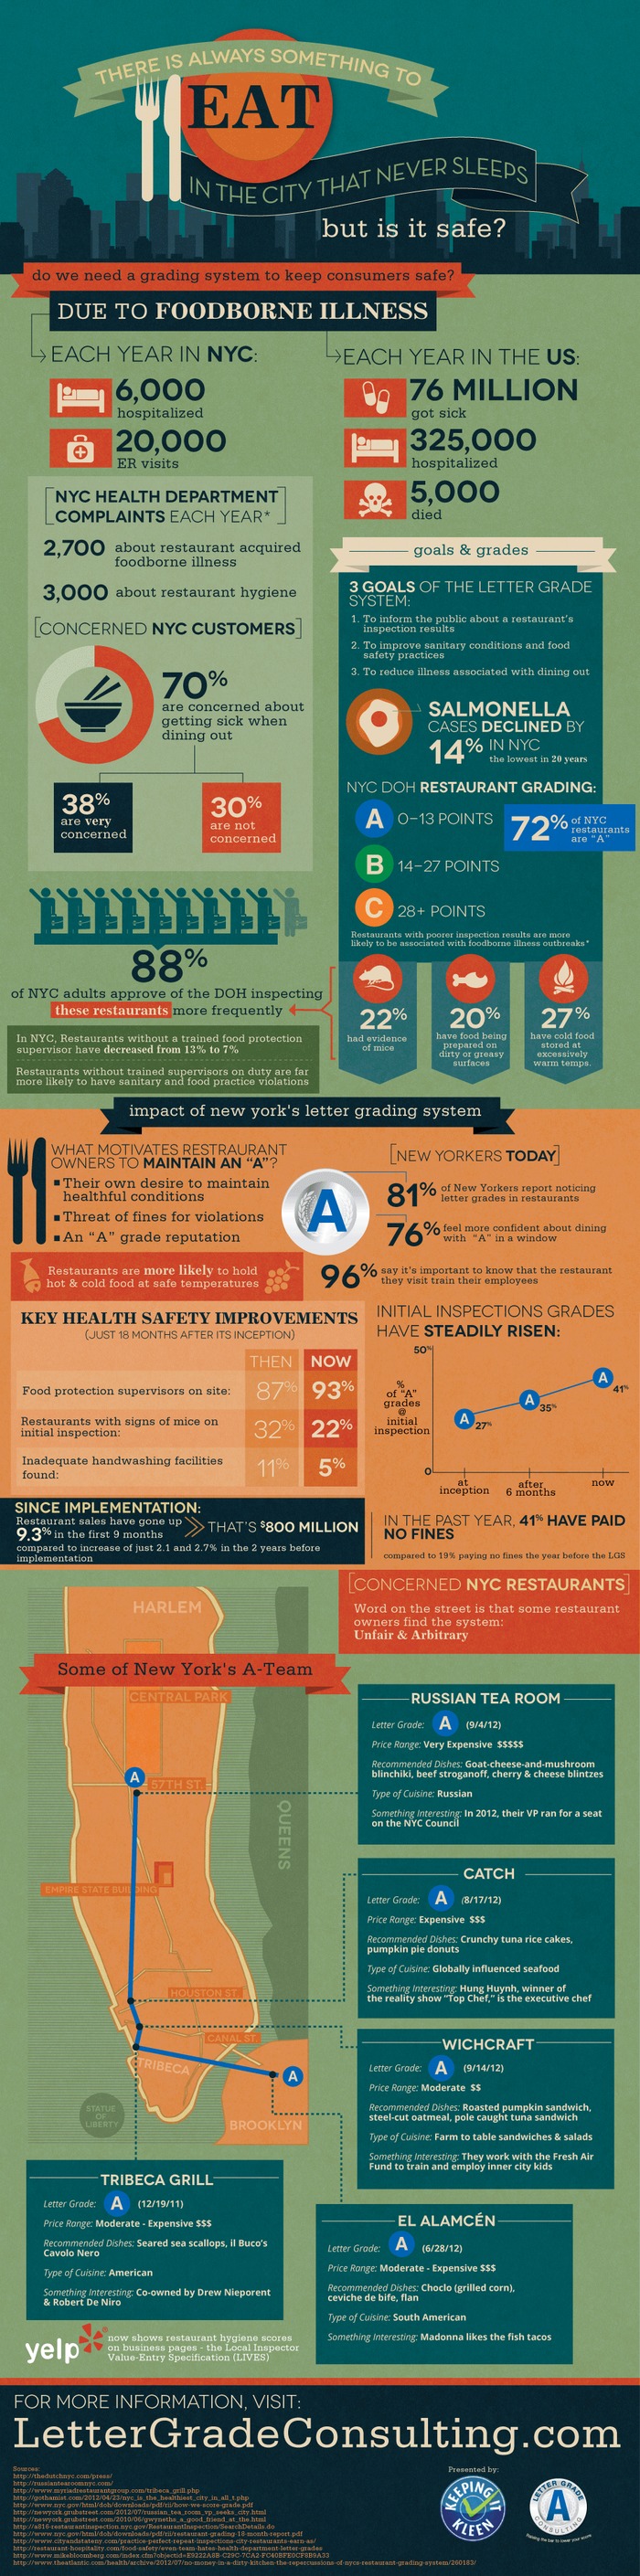 Eating Safely in the NYC